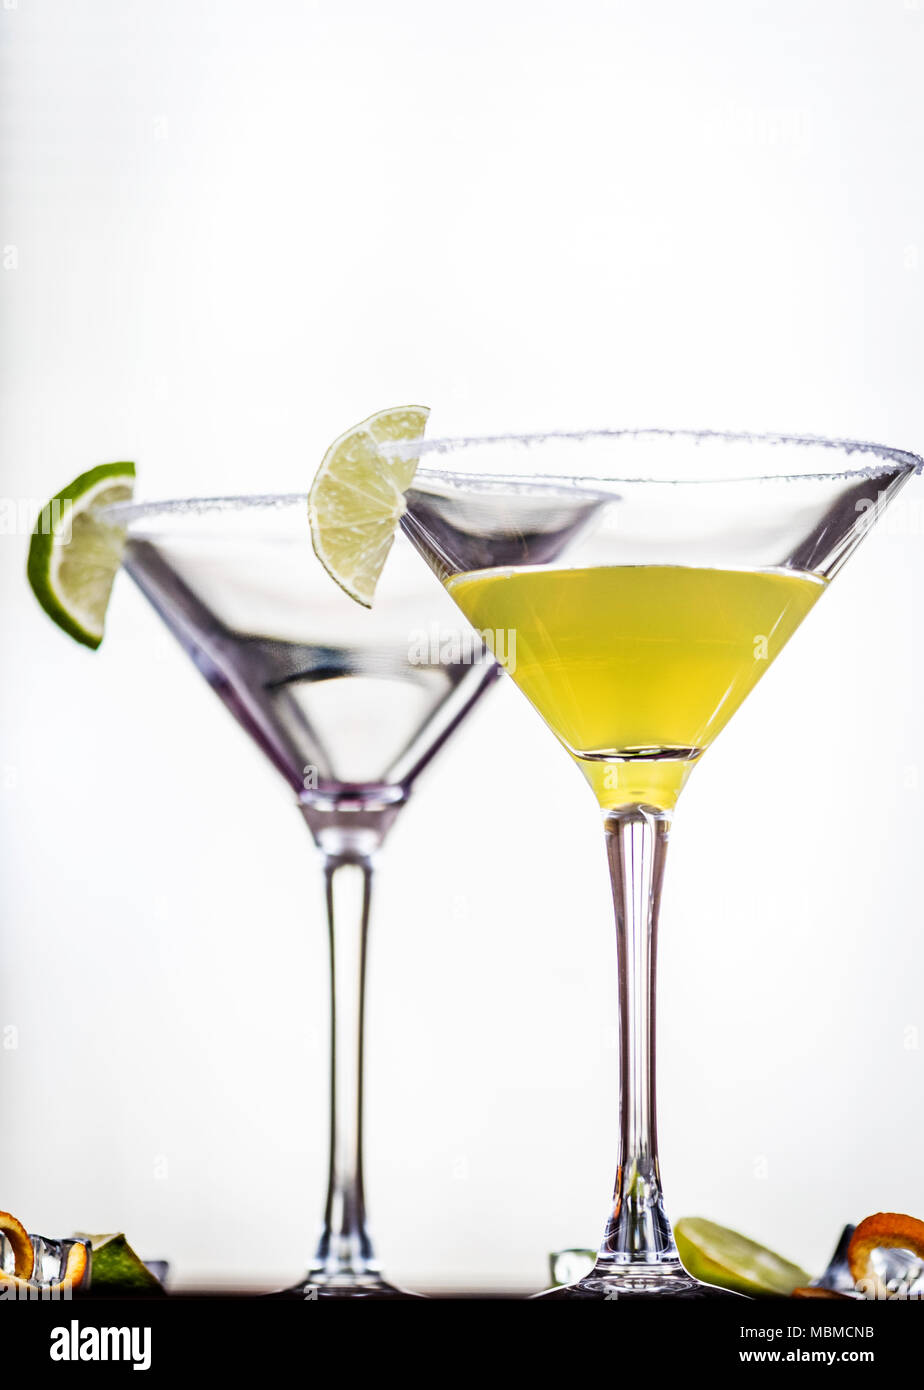 Alcohol cocktail Daiquiri with rum and lime Stock Photo